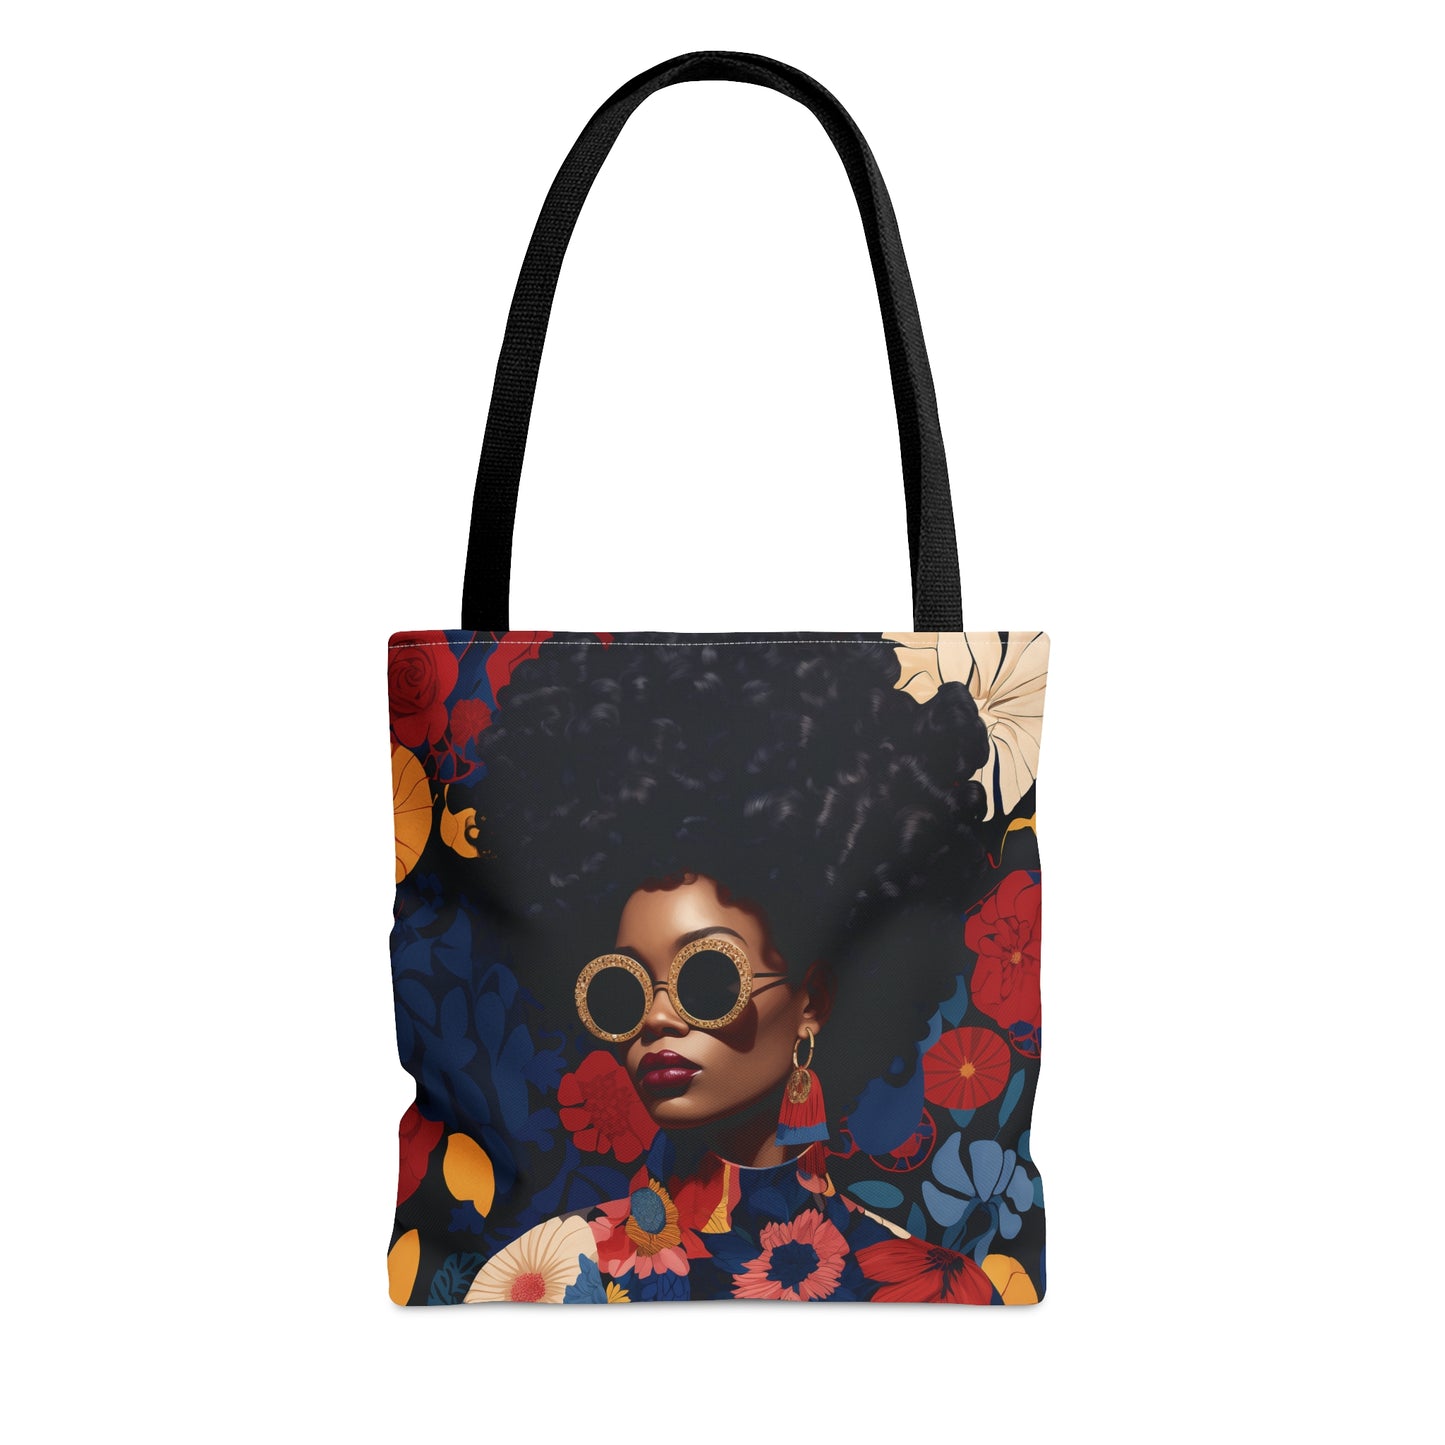 Chic Curls & Shades Tote